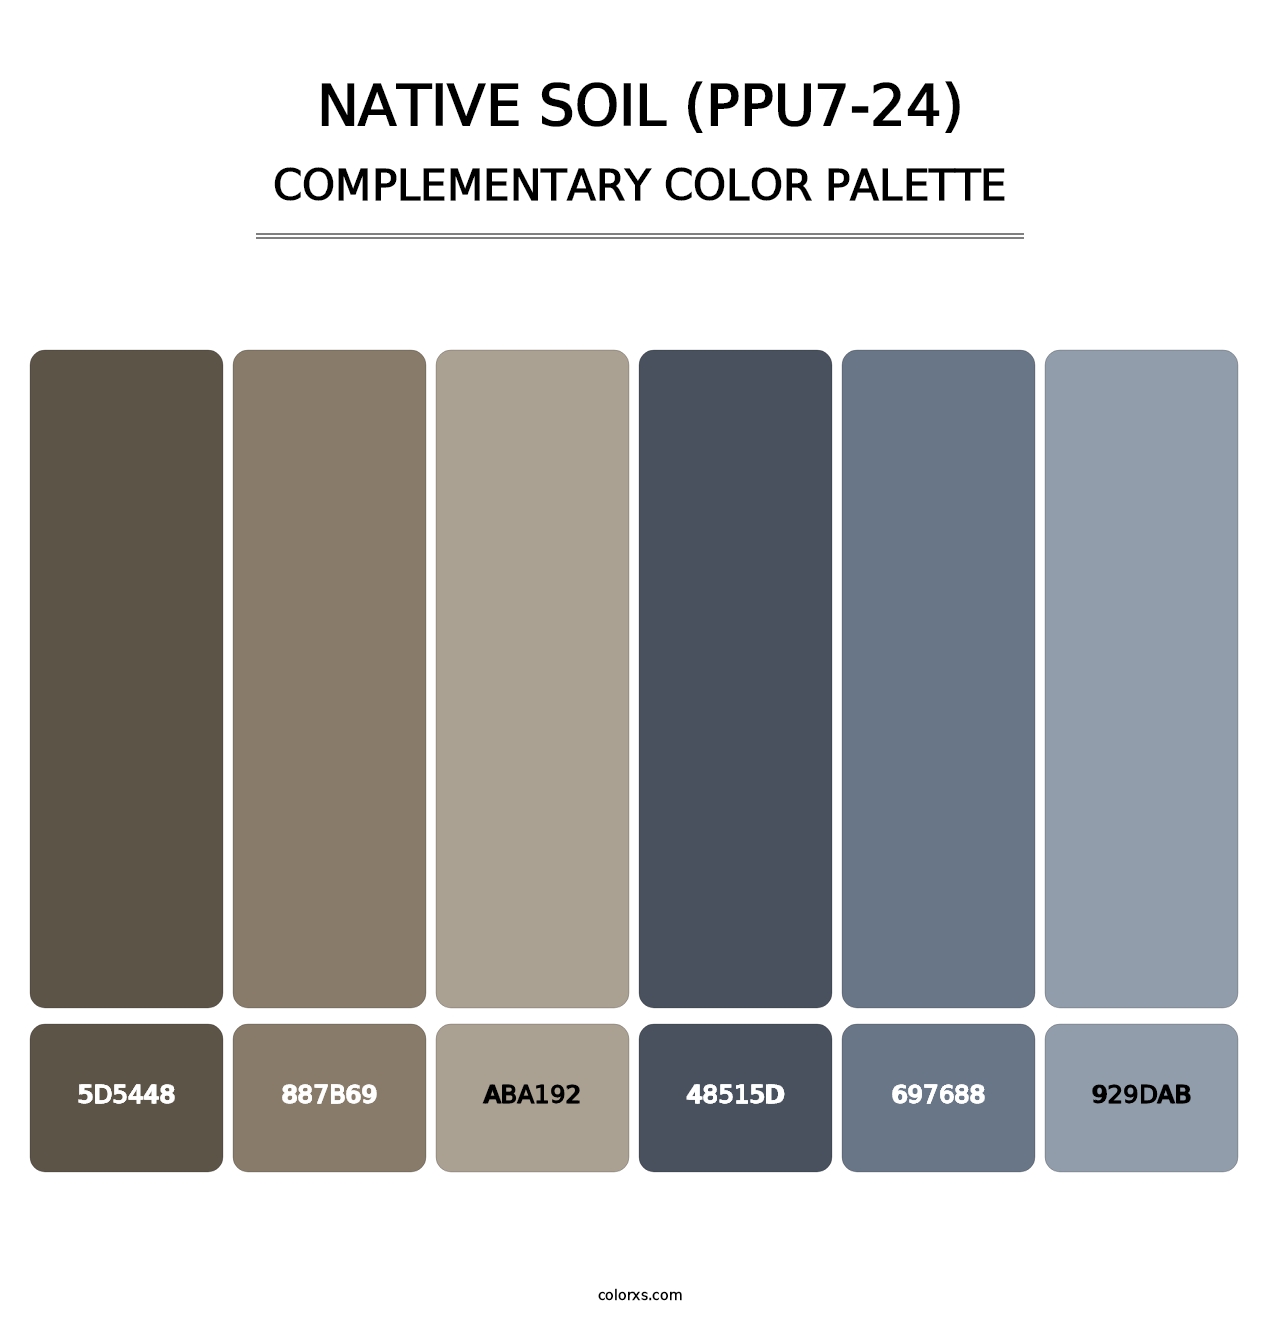 Native Soil (PPU7-24) - Complementary Color Palette